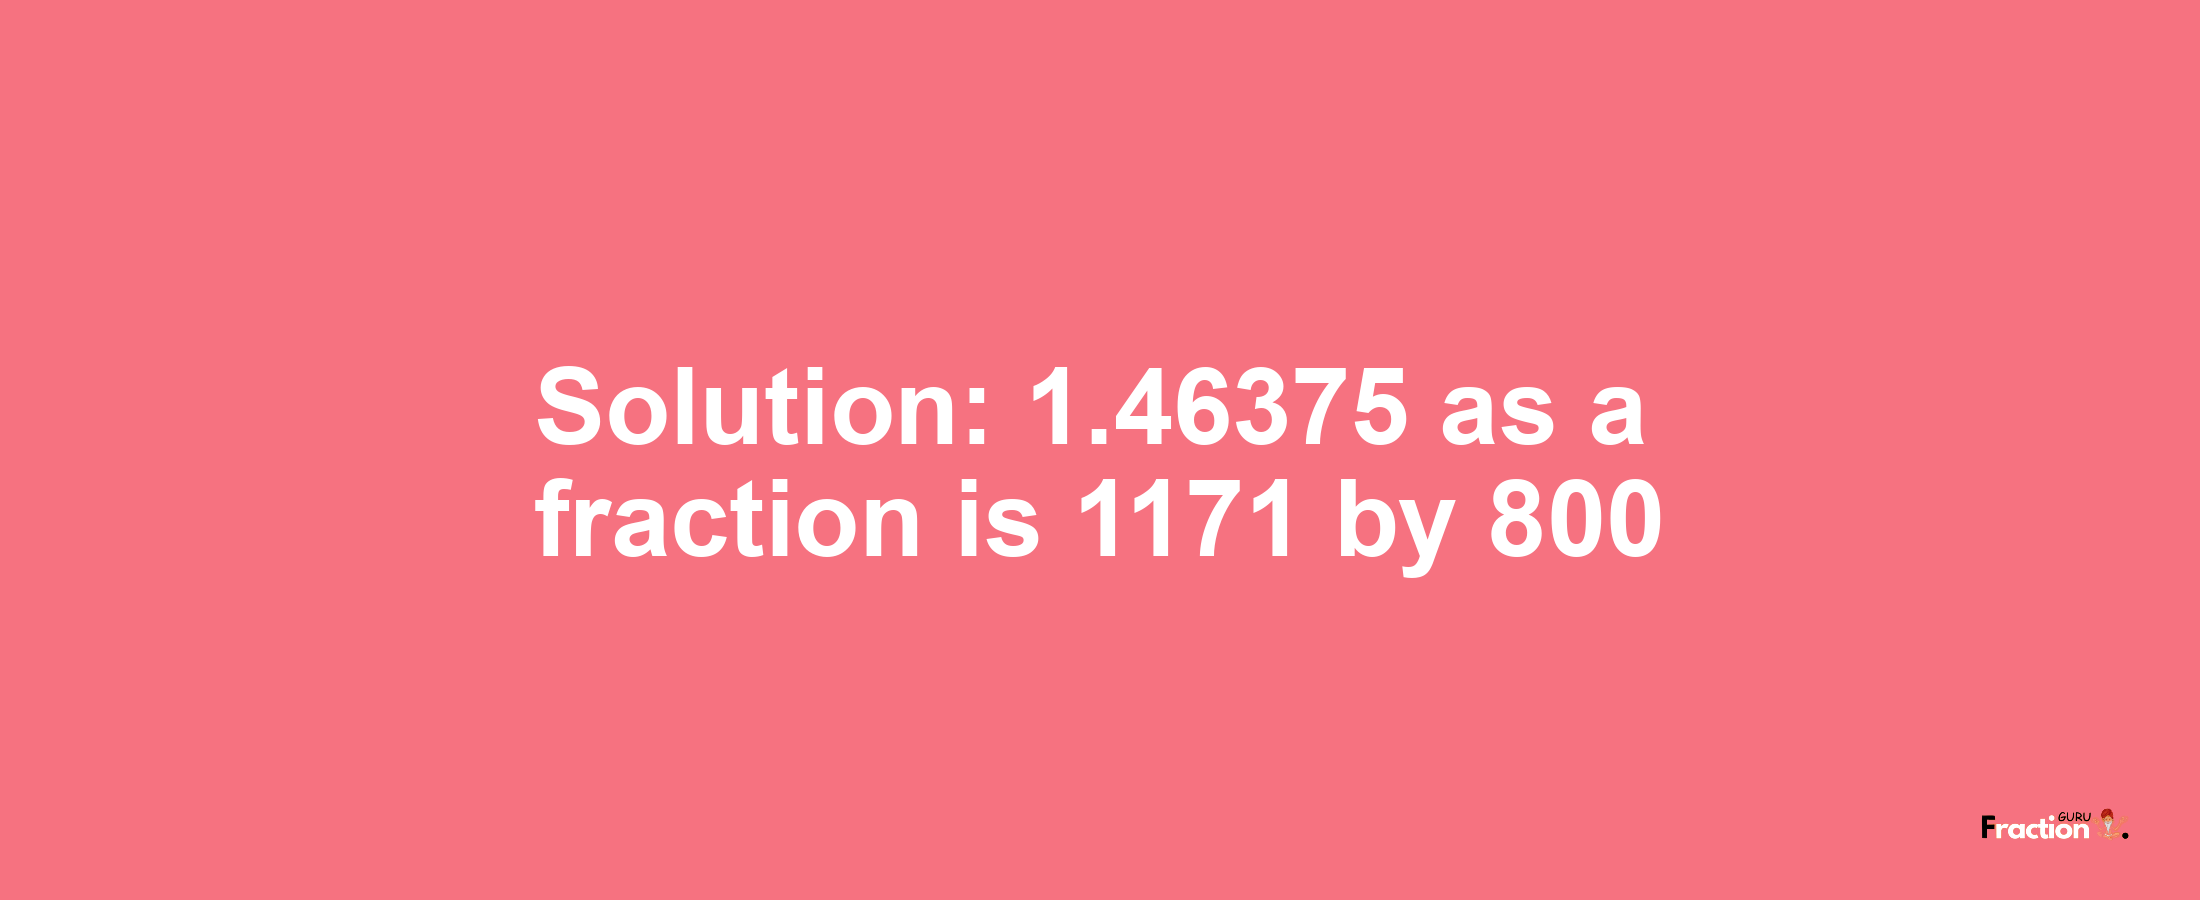 Solution:1.46375 as a fraction is 1171/800